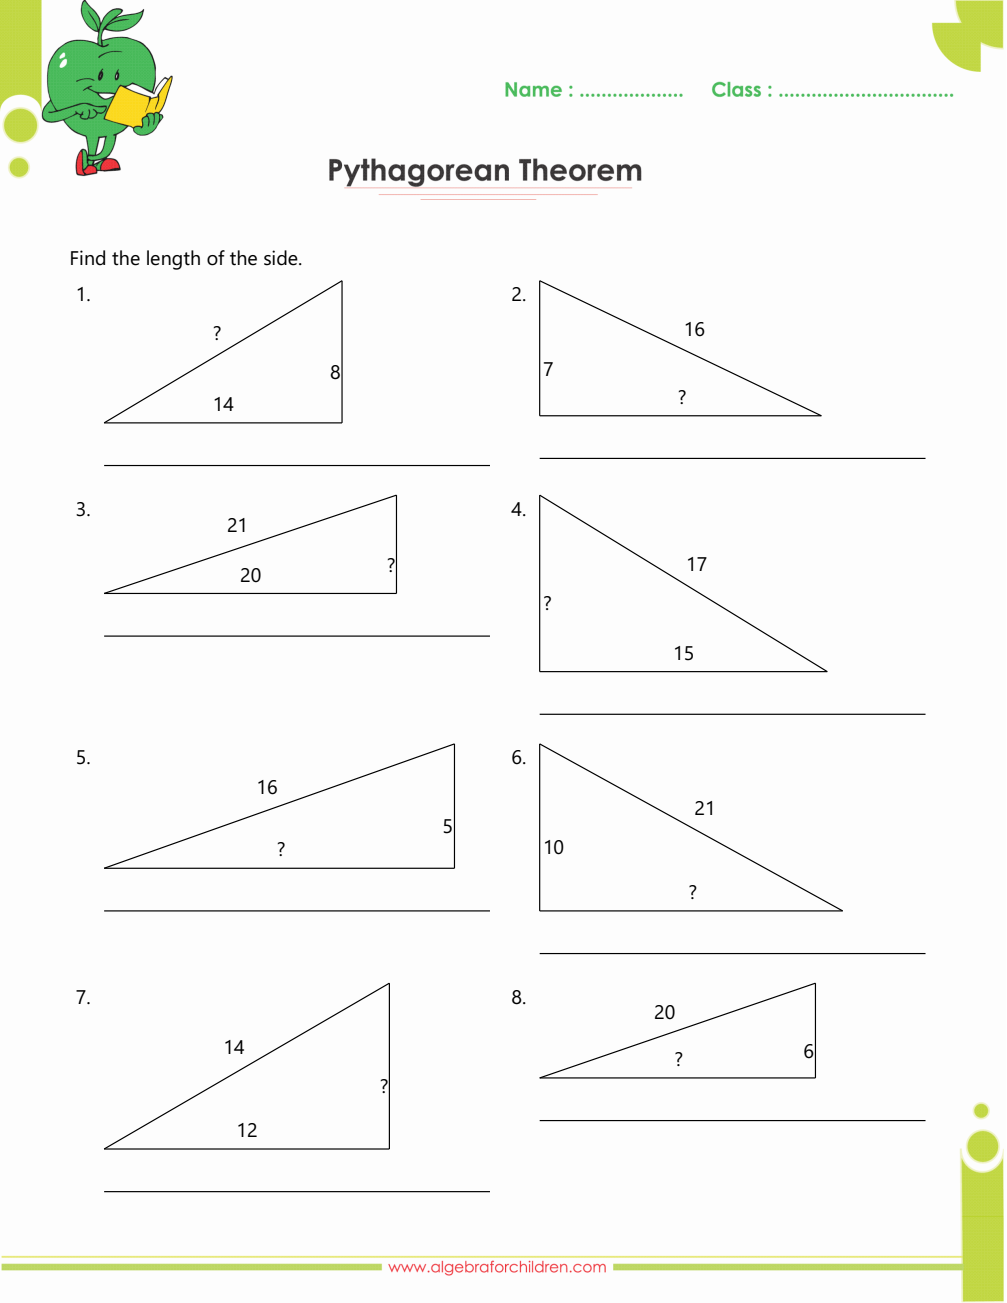 pythagorean theorem worksheets with answer key pdf, pythagorean theorem word problems, pythagorean theorem worksheet pdf, pythagorean theorem worksheet with answers, pythagorean theorem word problems worksheet, pythagorean theorem worksheets grade 9 pdf, pythagorean theorem worksheets grade 8 pdf, pythagorean theorem worksheets with answers grade 10, pythagorean theorem worksheet grade 7 pdf,  pythagorean theorem worksheet grade 8 with answers,